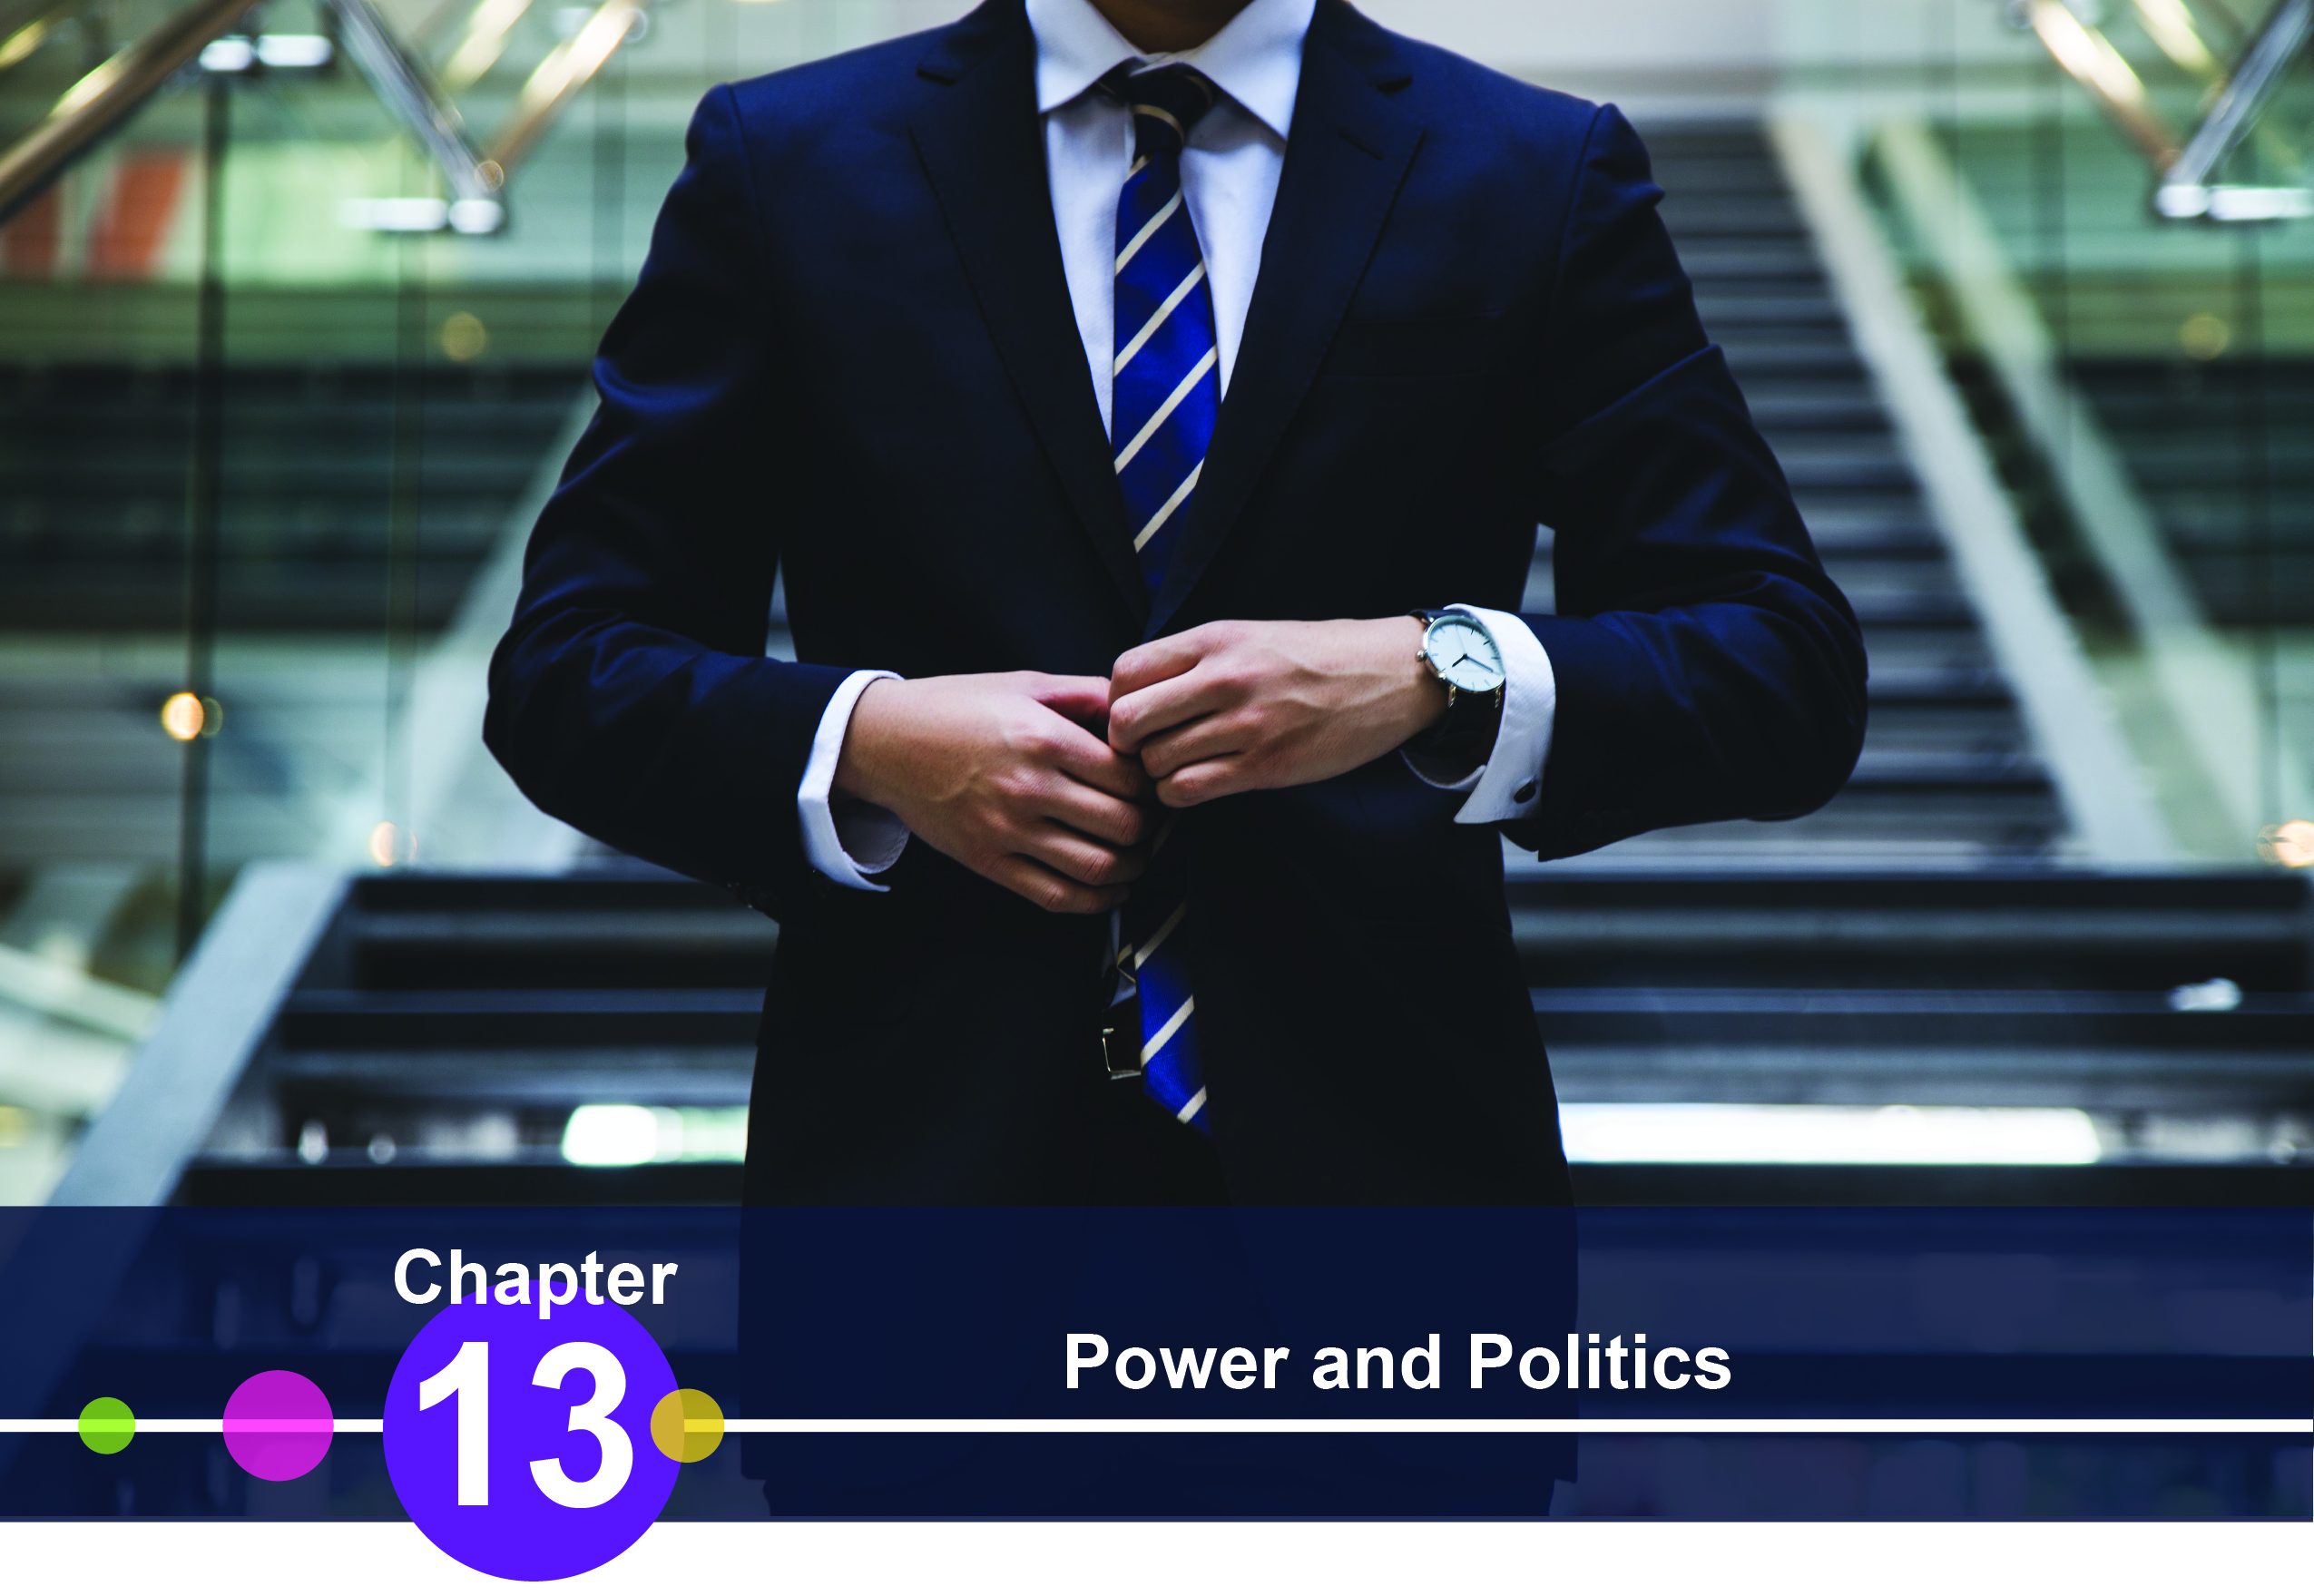 case study power and politics in organizations